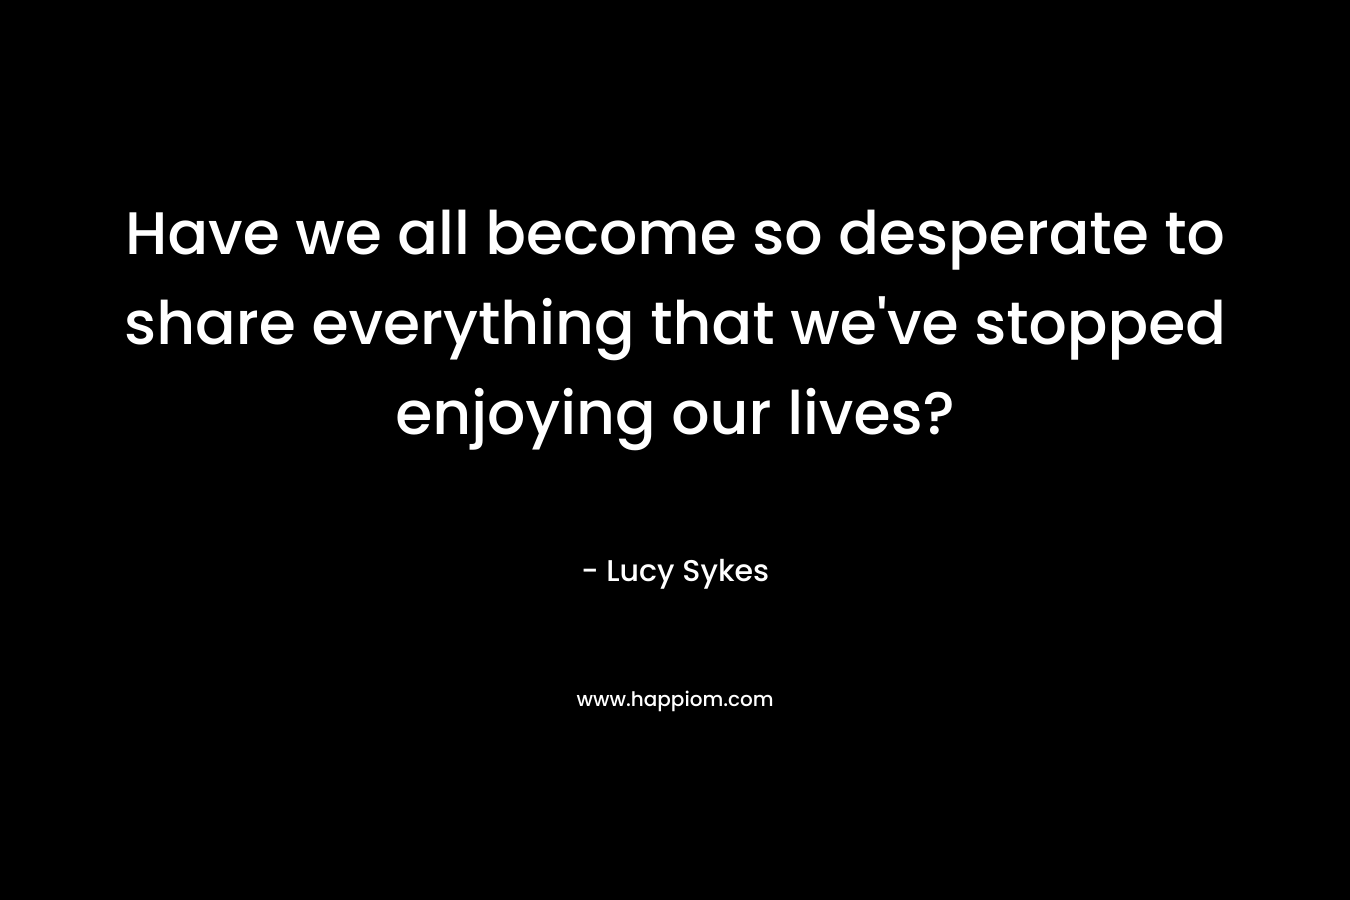 Have we all become so desperate to share everything that we've stopped enjoying our lives?